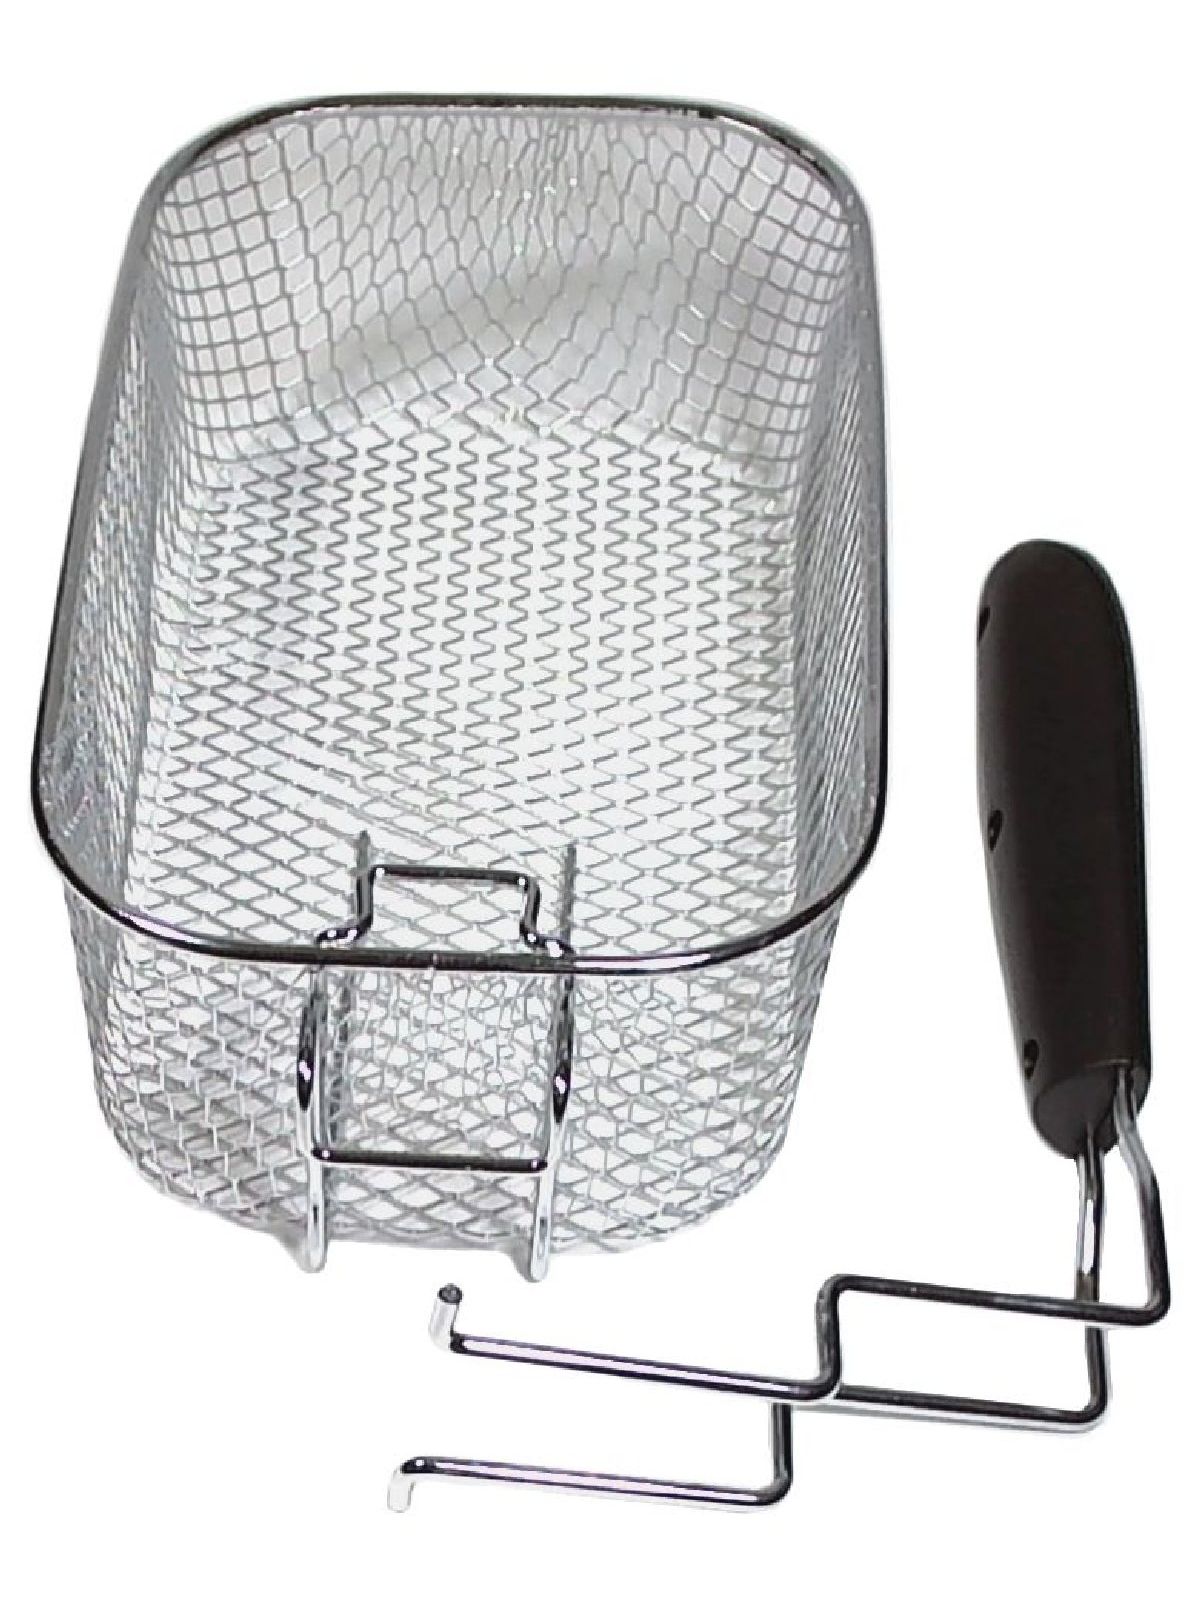 Frying Basket. Small